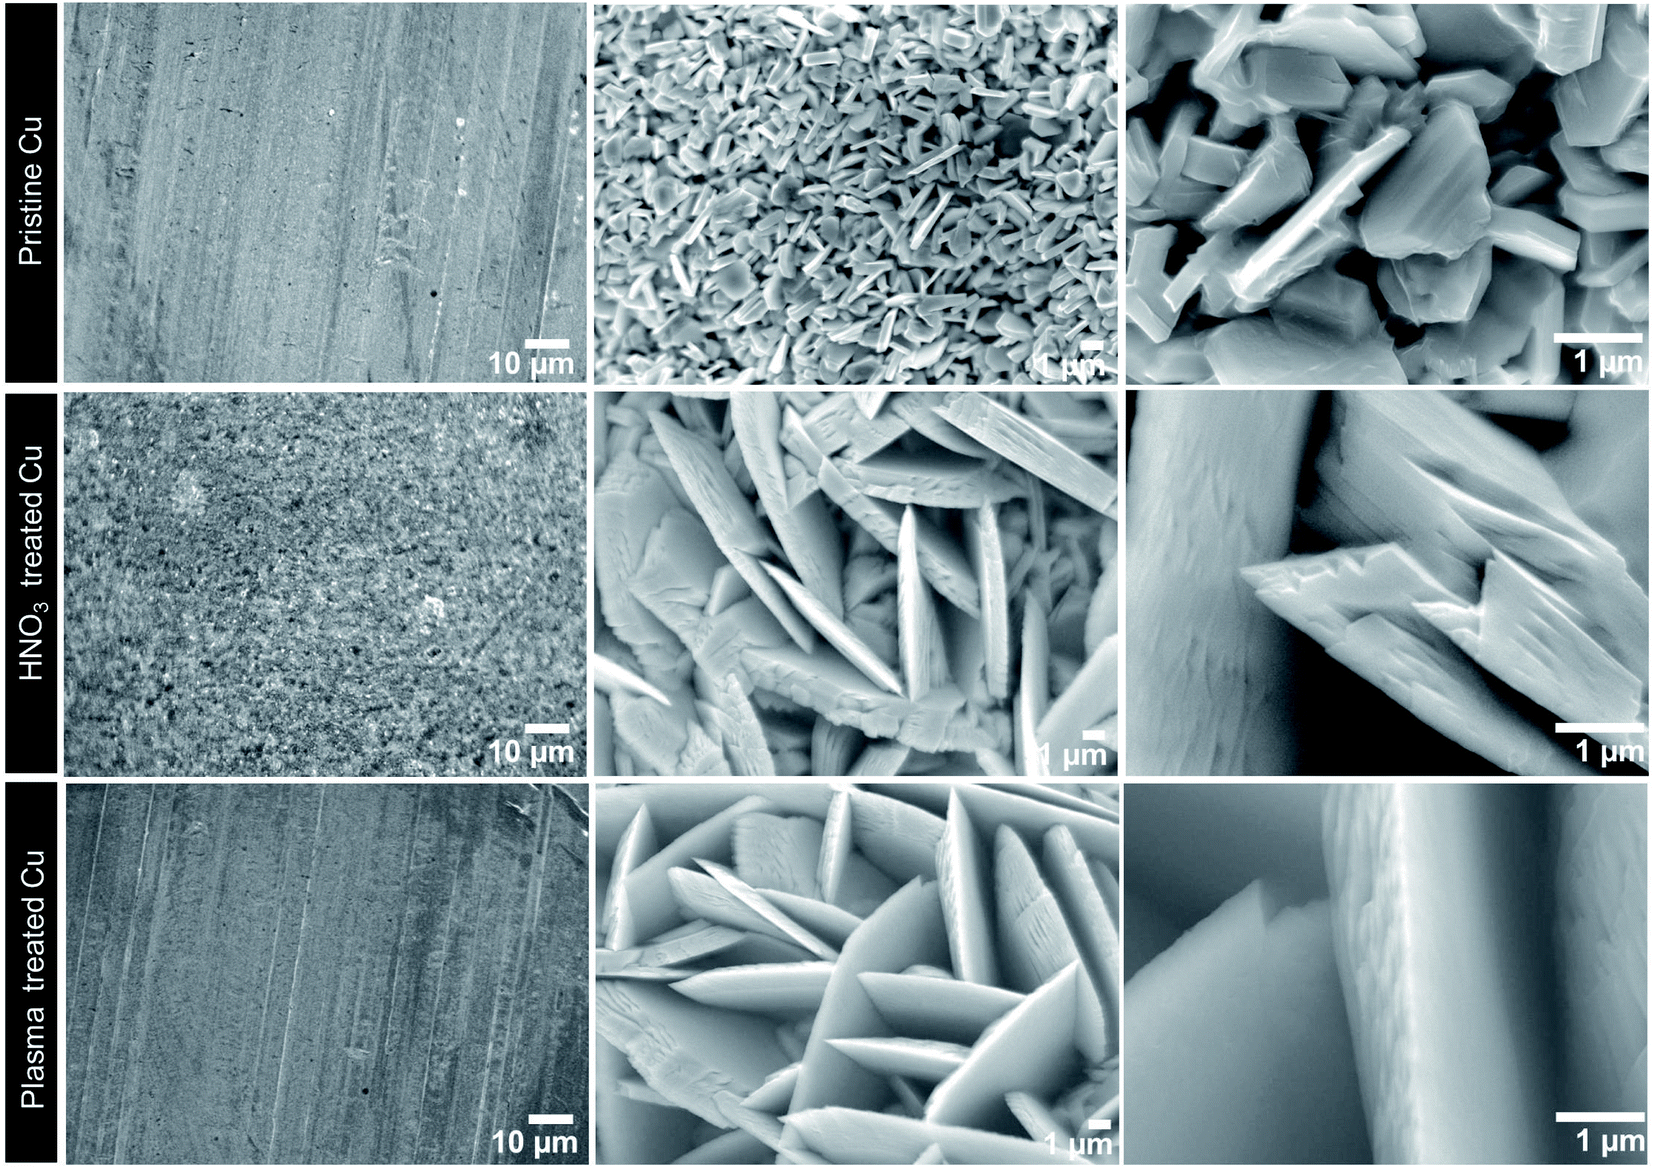 Effects of gas-phase and wet-chemical surface treatments on substrates  induced vertical, valley–hill & micro-granular growth morphologies of close  spa  - Nanoscale Advances (RSC Publishing) DOI:10.1039/D0NA00532K